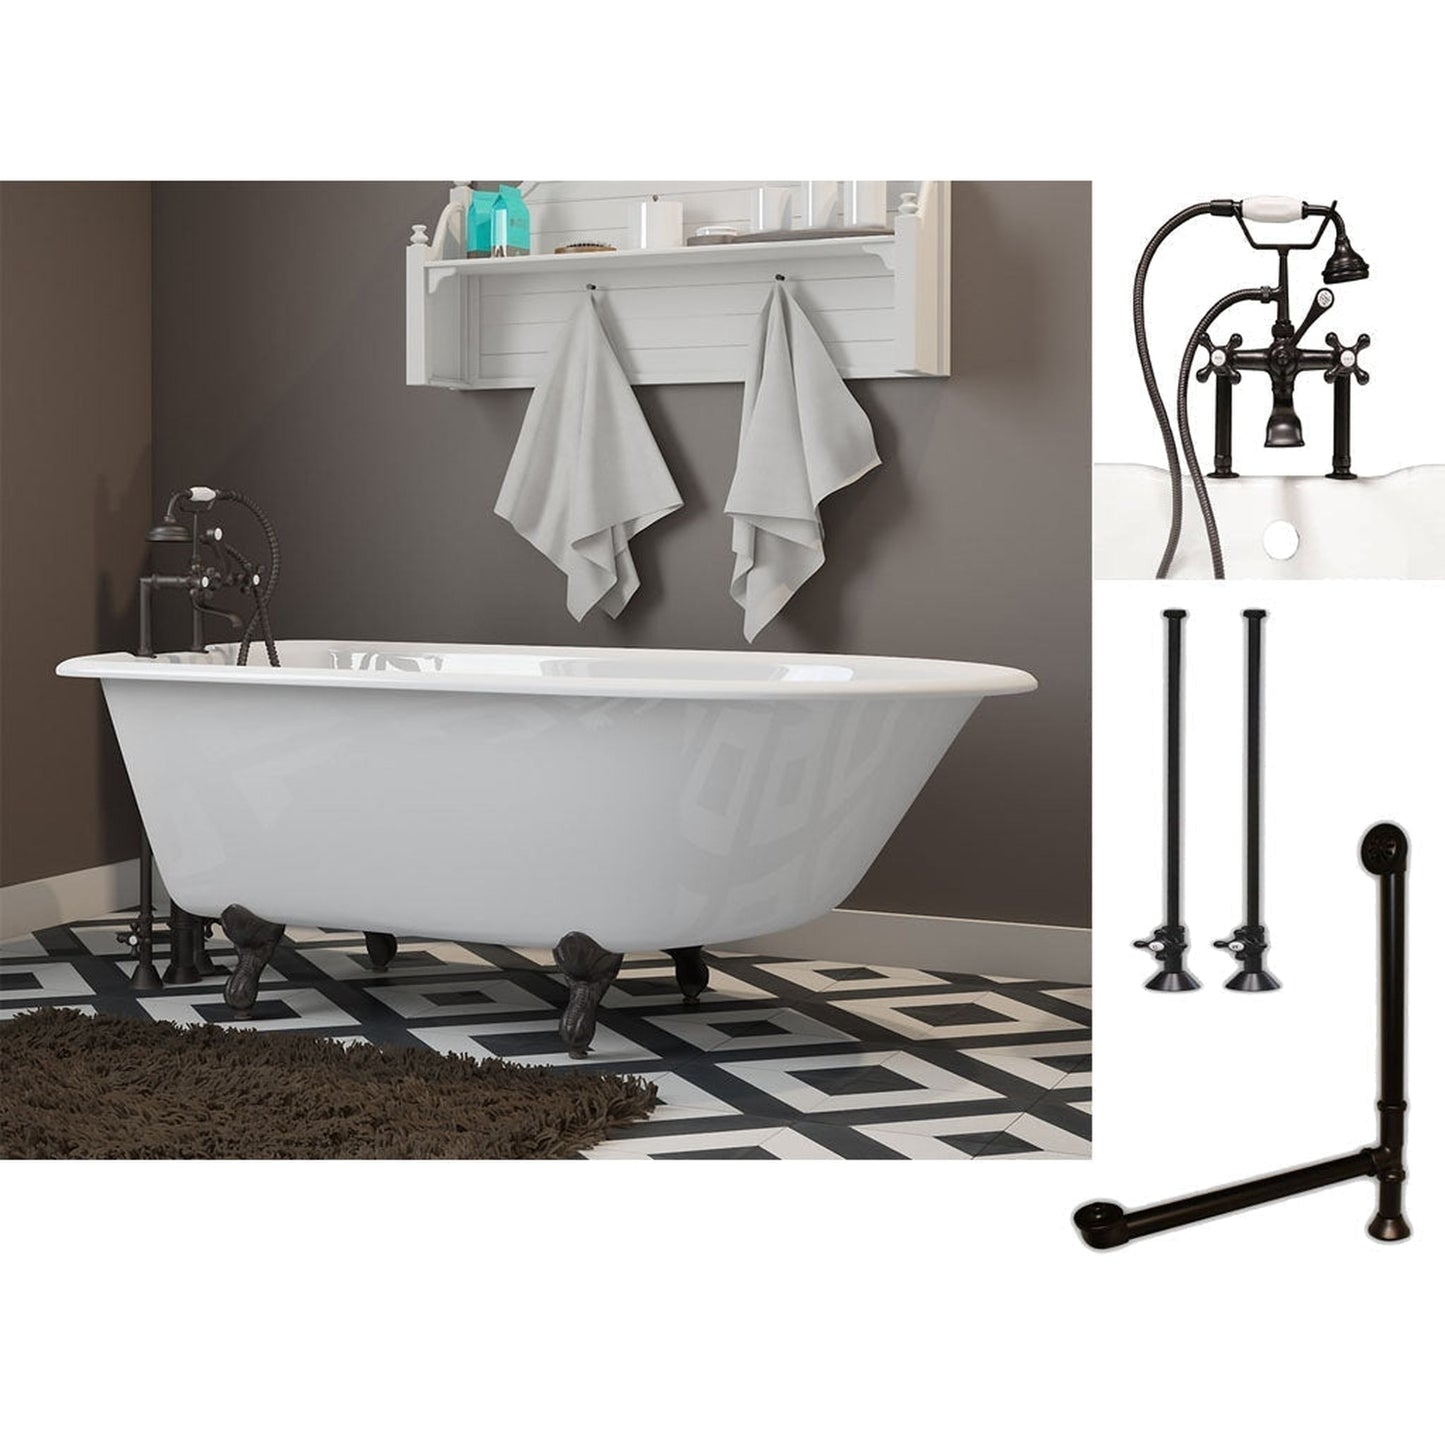 Cambridge Plumbing 54" White Cast Iron Rolled Rim Clawfoot Bathtub With Deck Holes And Complete Plumbing Package Including 6” Riser Deck Mount Faucet, Supply Lines, Drain And Overflow Assembly In Oil Rubbed Bronze